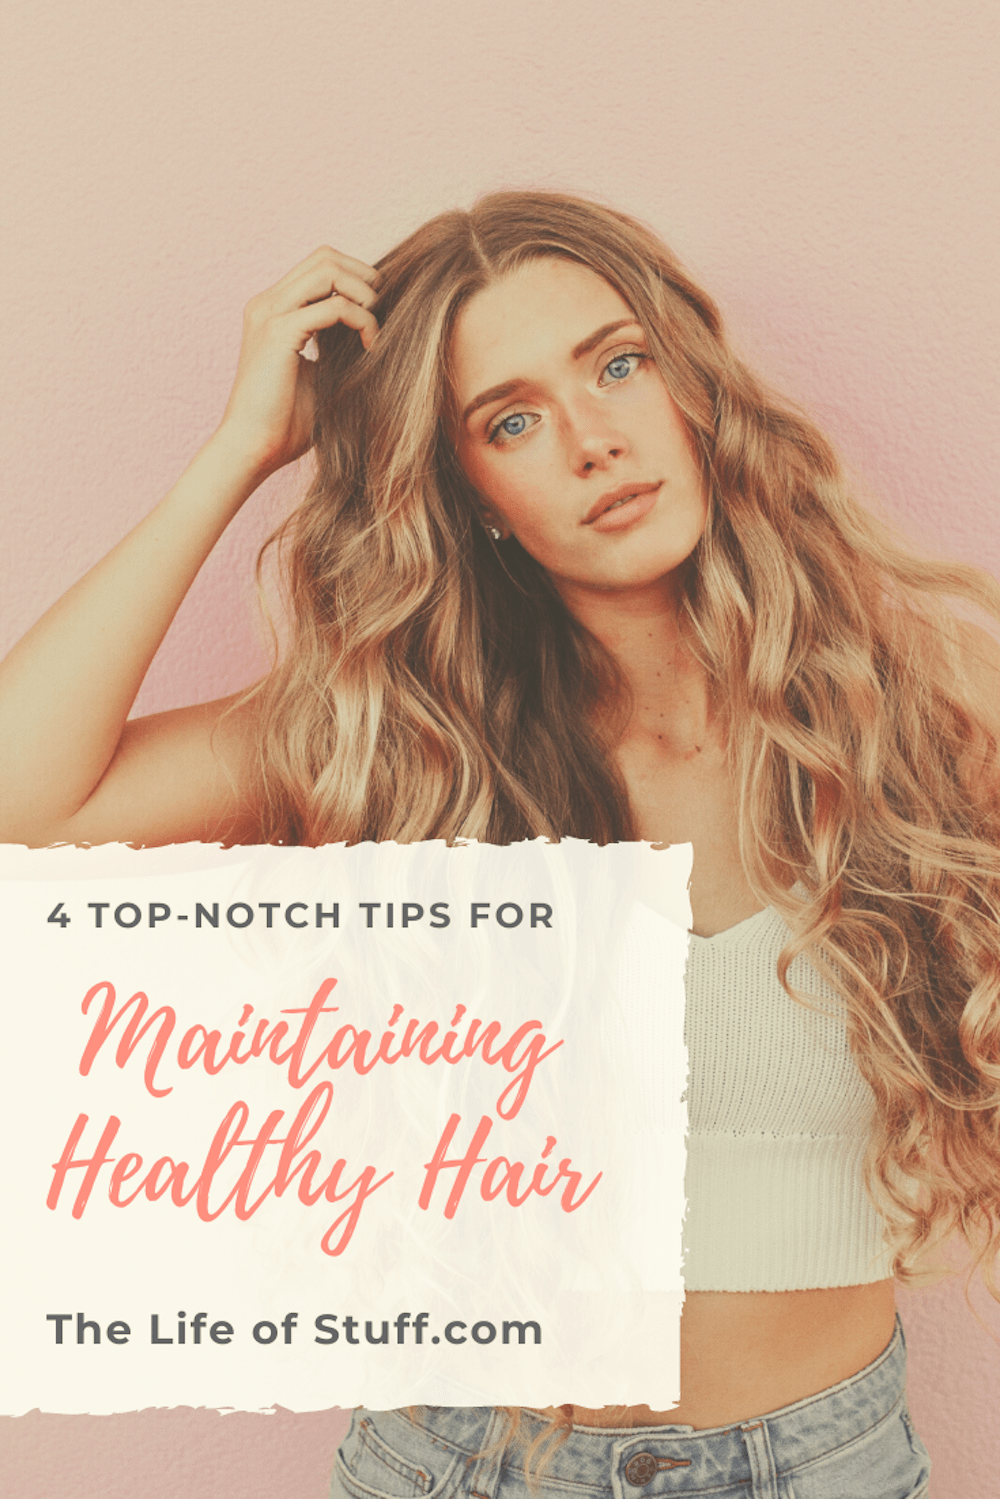 4 Top-Notch Tips For Maintaining Healthy Hair